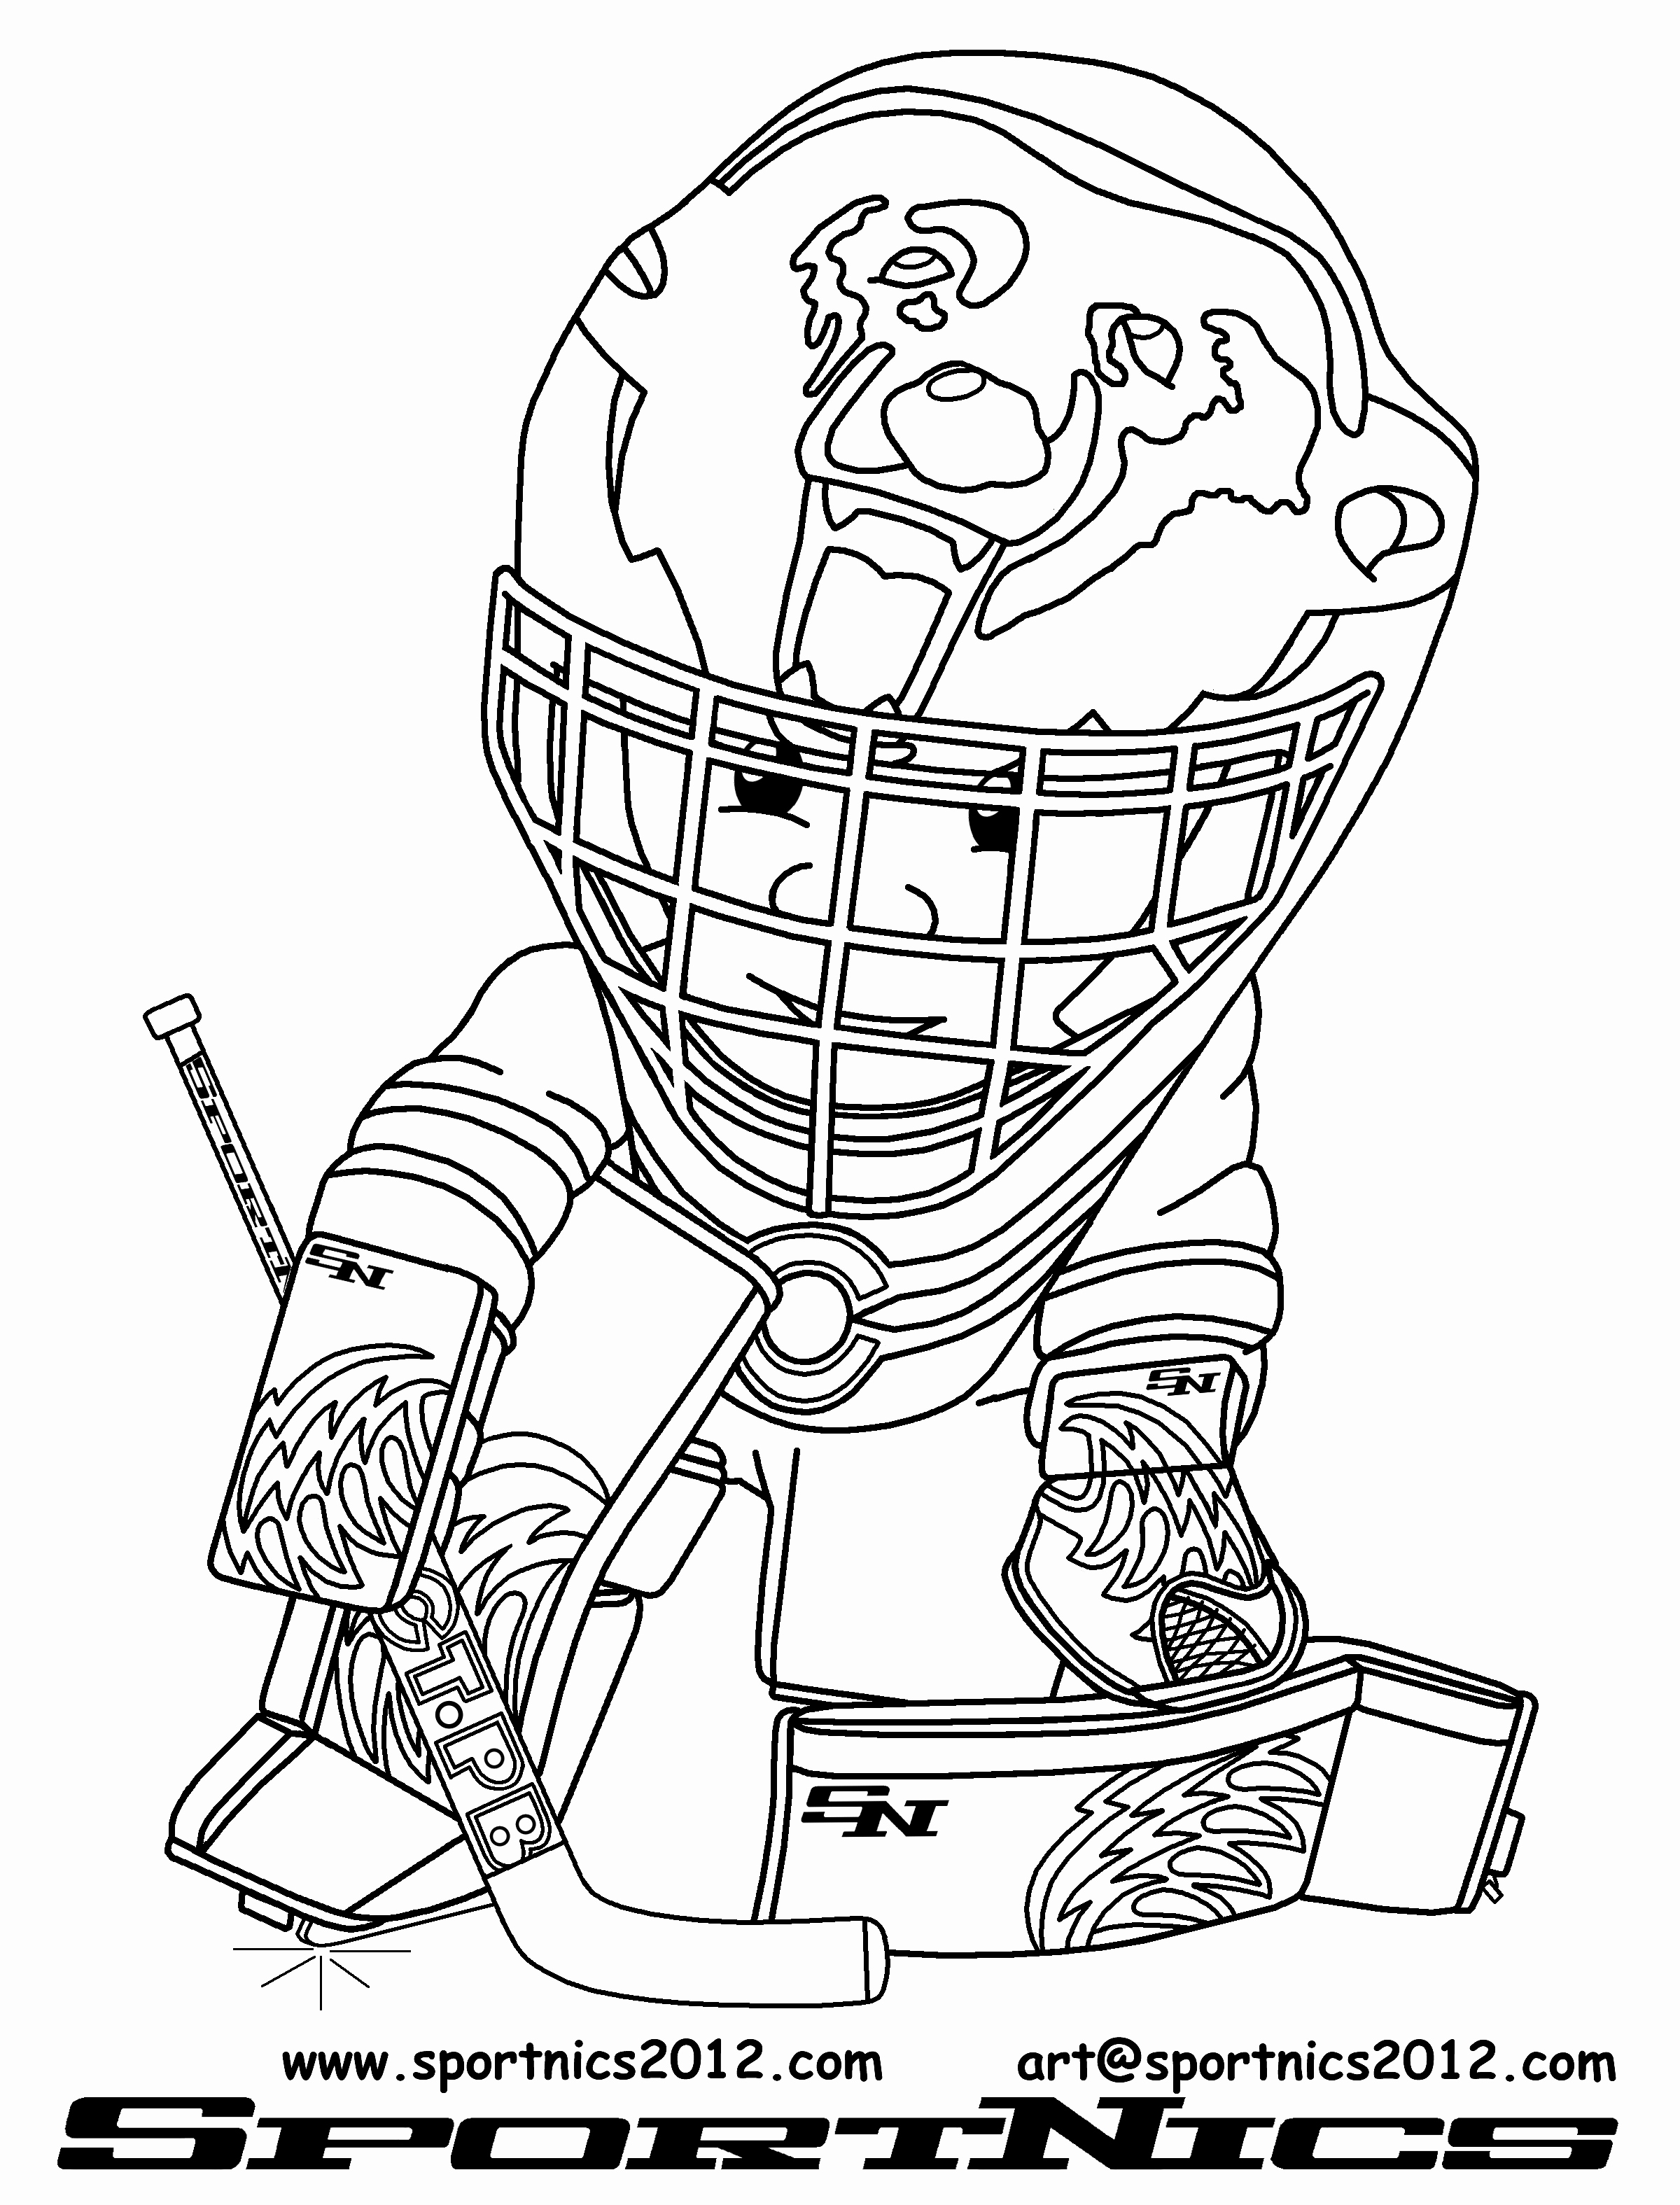 Goalie Coloring Pages at GetColorings.com | Free printable colorings